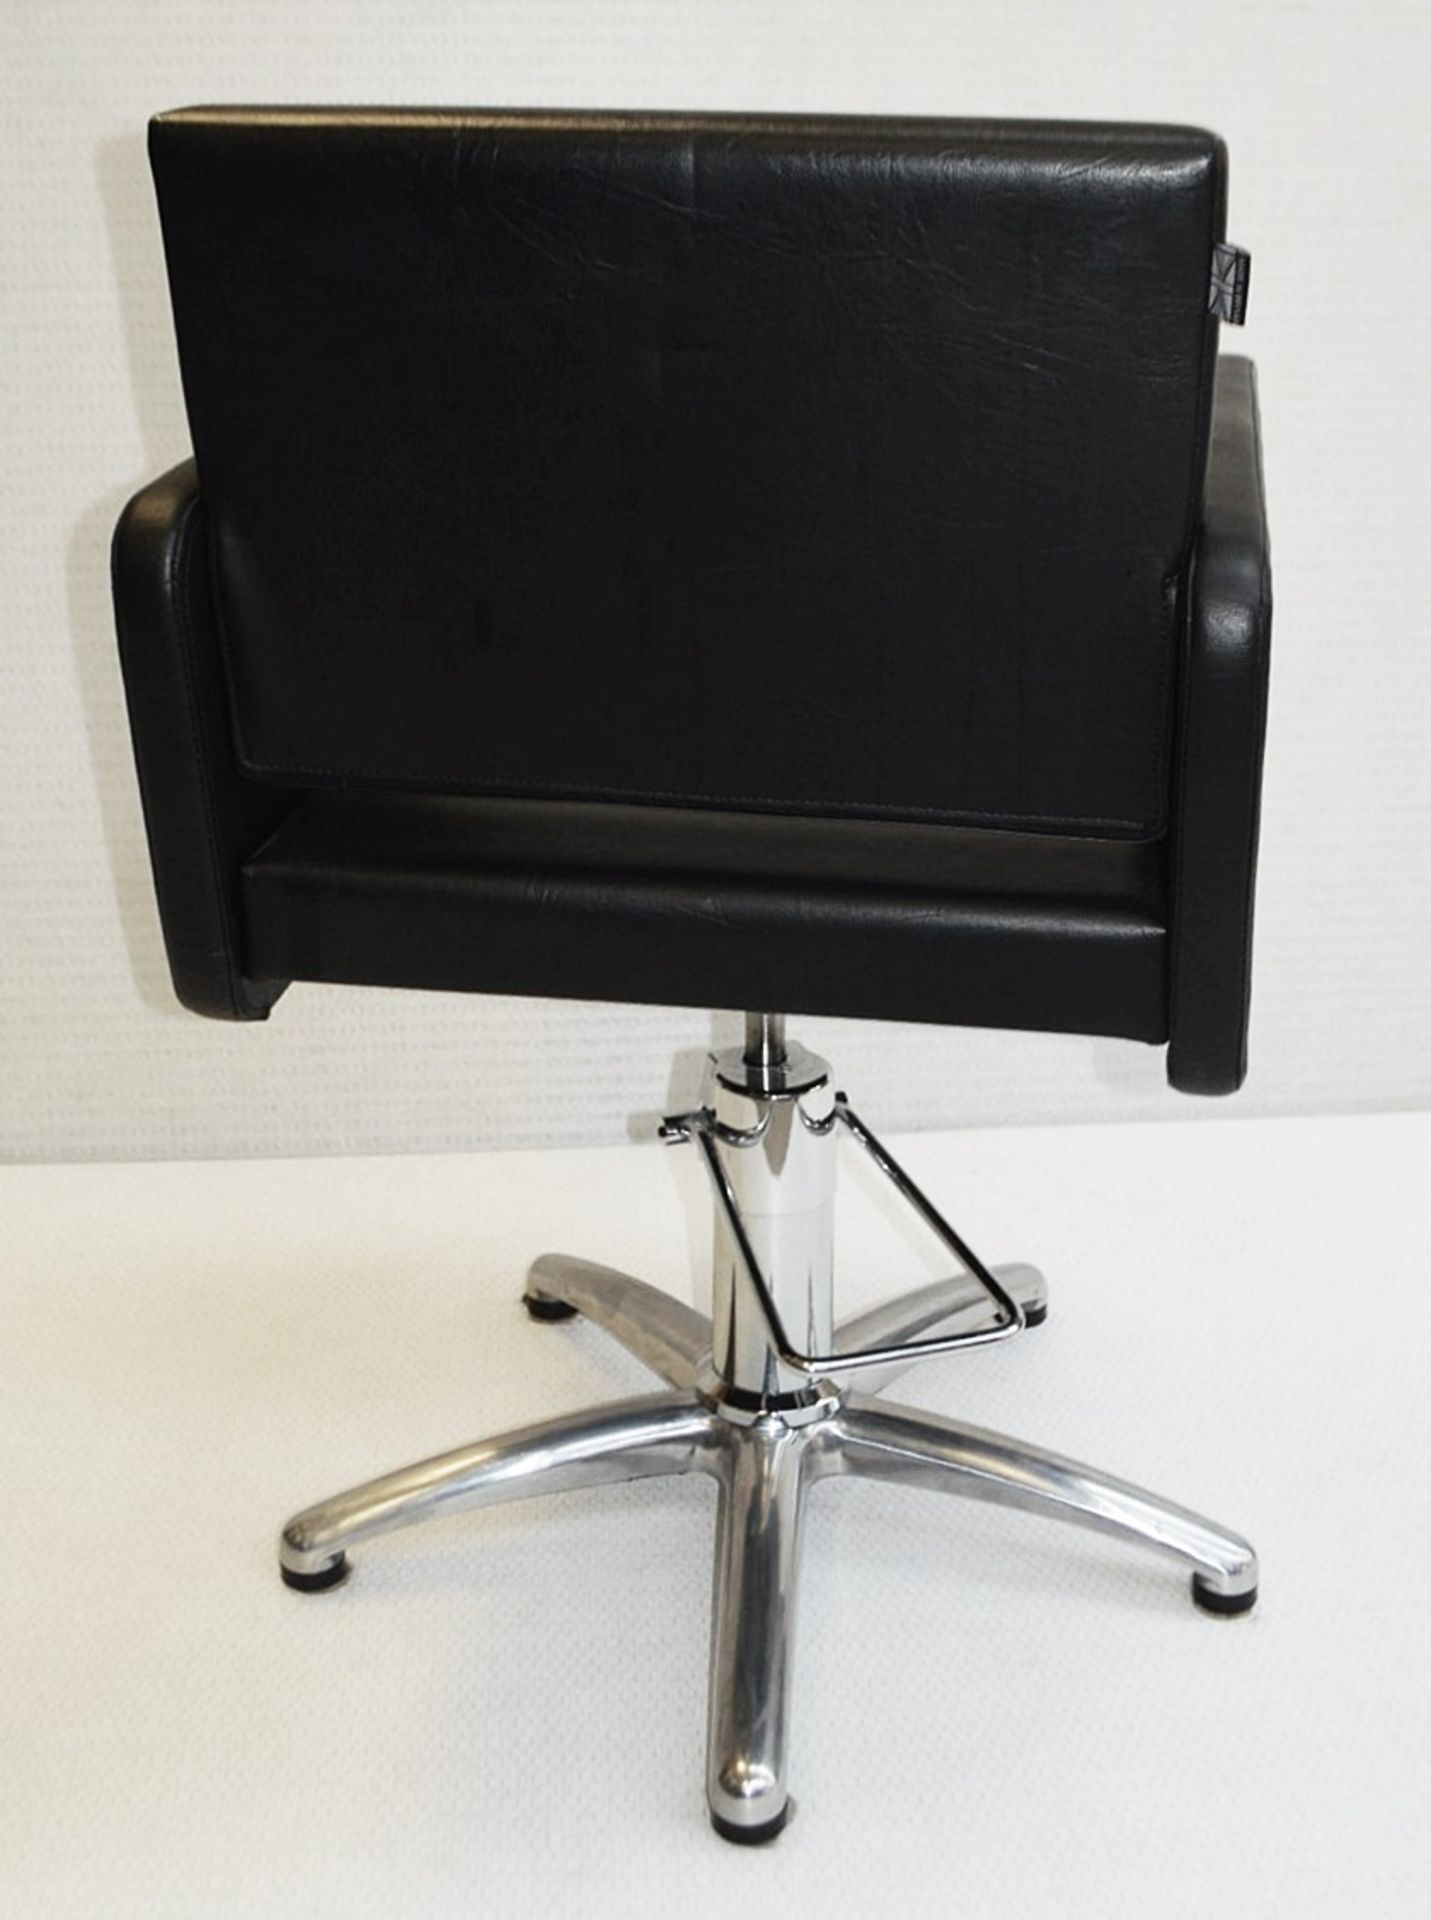 1 x Beauty Salon Hairdressing Styling Chair In Black Faux Leather - Original RRP £396.00 - Image 5 of 5